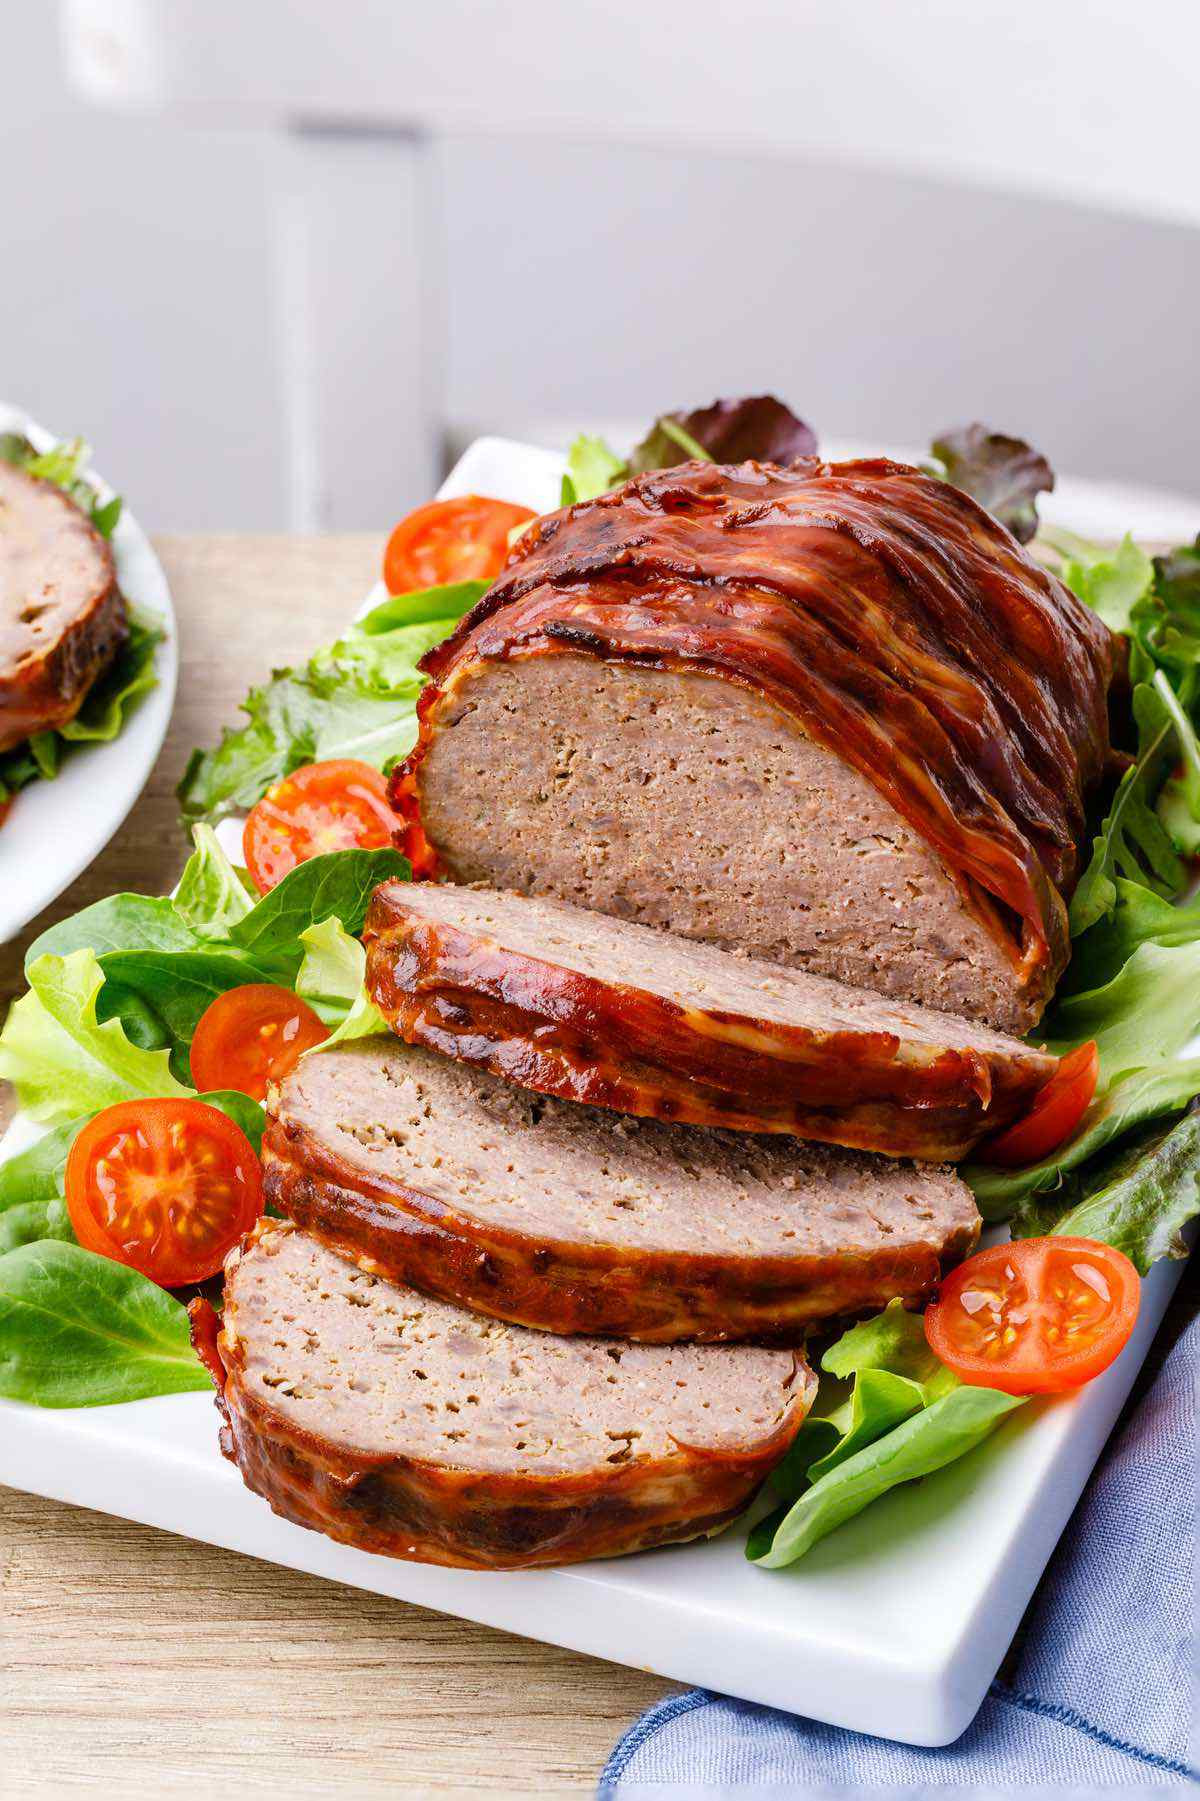 Paleo Meatloaf with Bacon Awesome Bacon Wrapped Bbq Paleo Meatloaf This is so Good